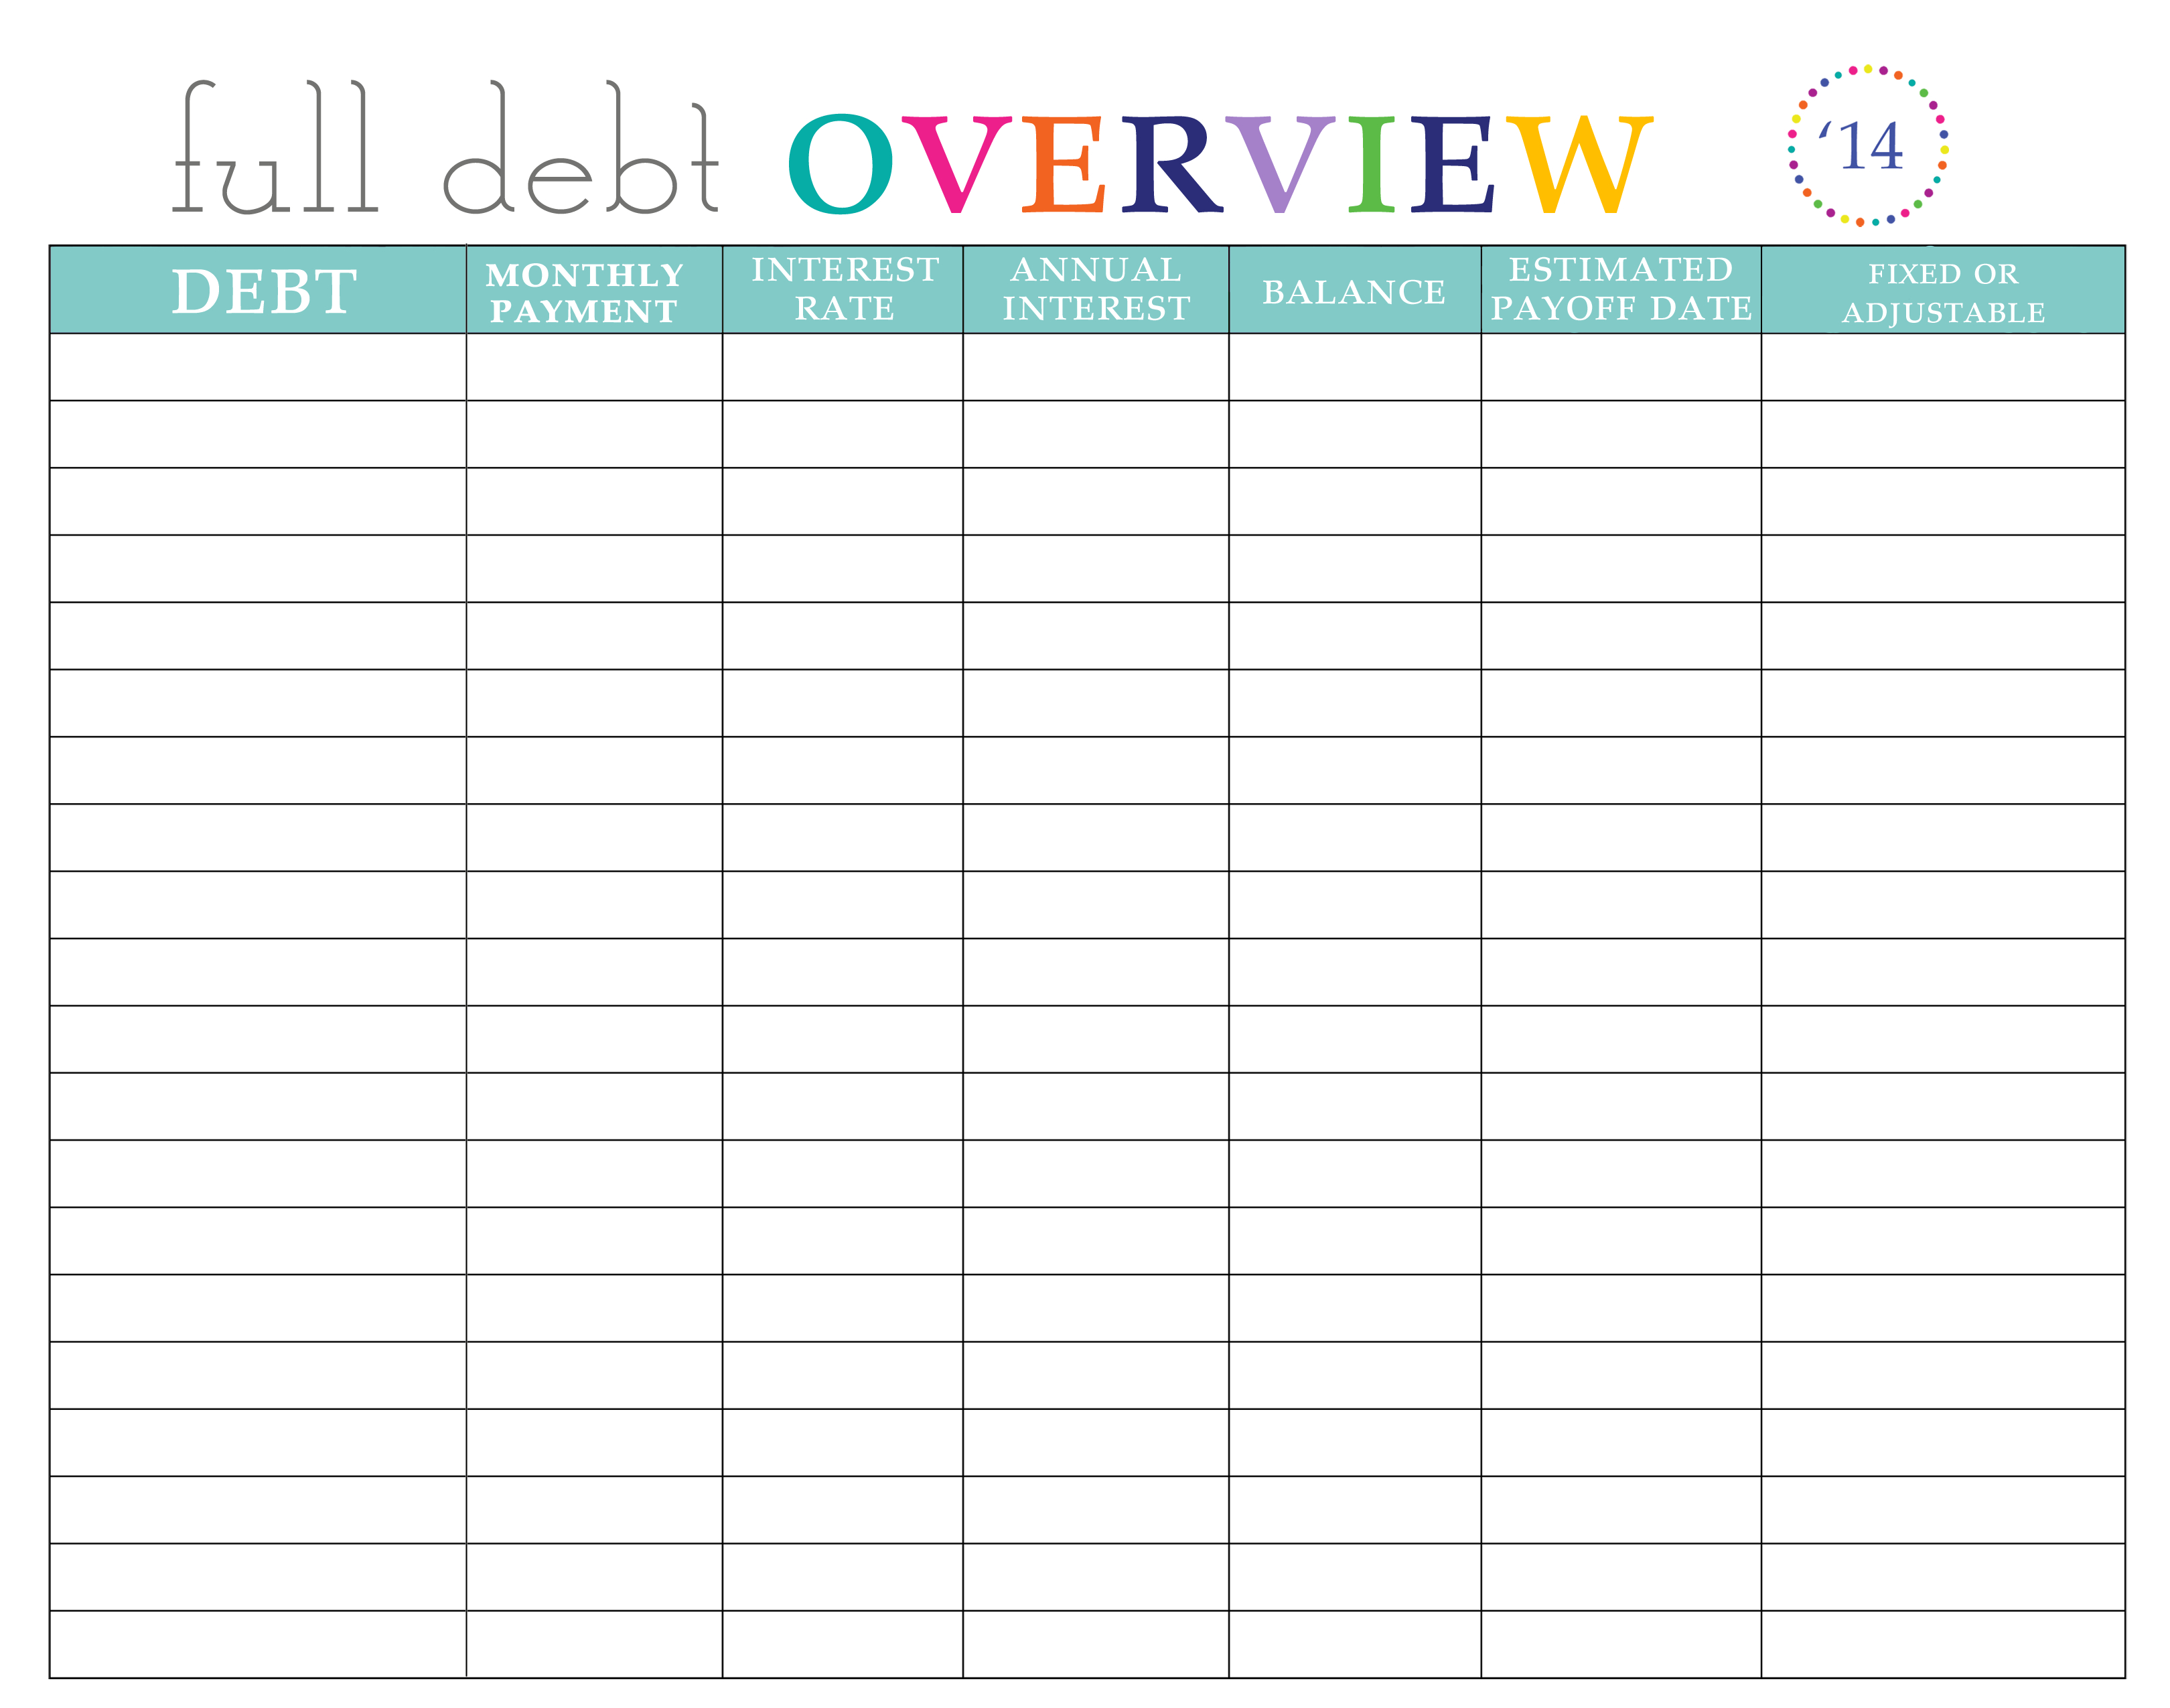 debt-repayment-calculator-spreadsheet-pertaining-to-paying-off-debt